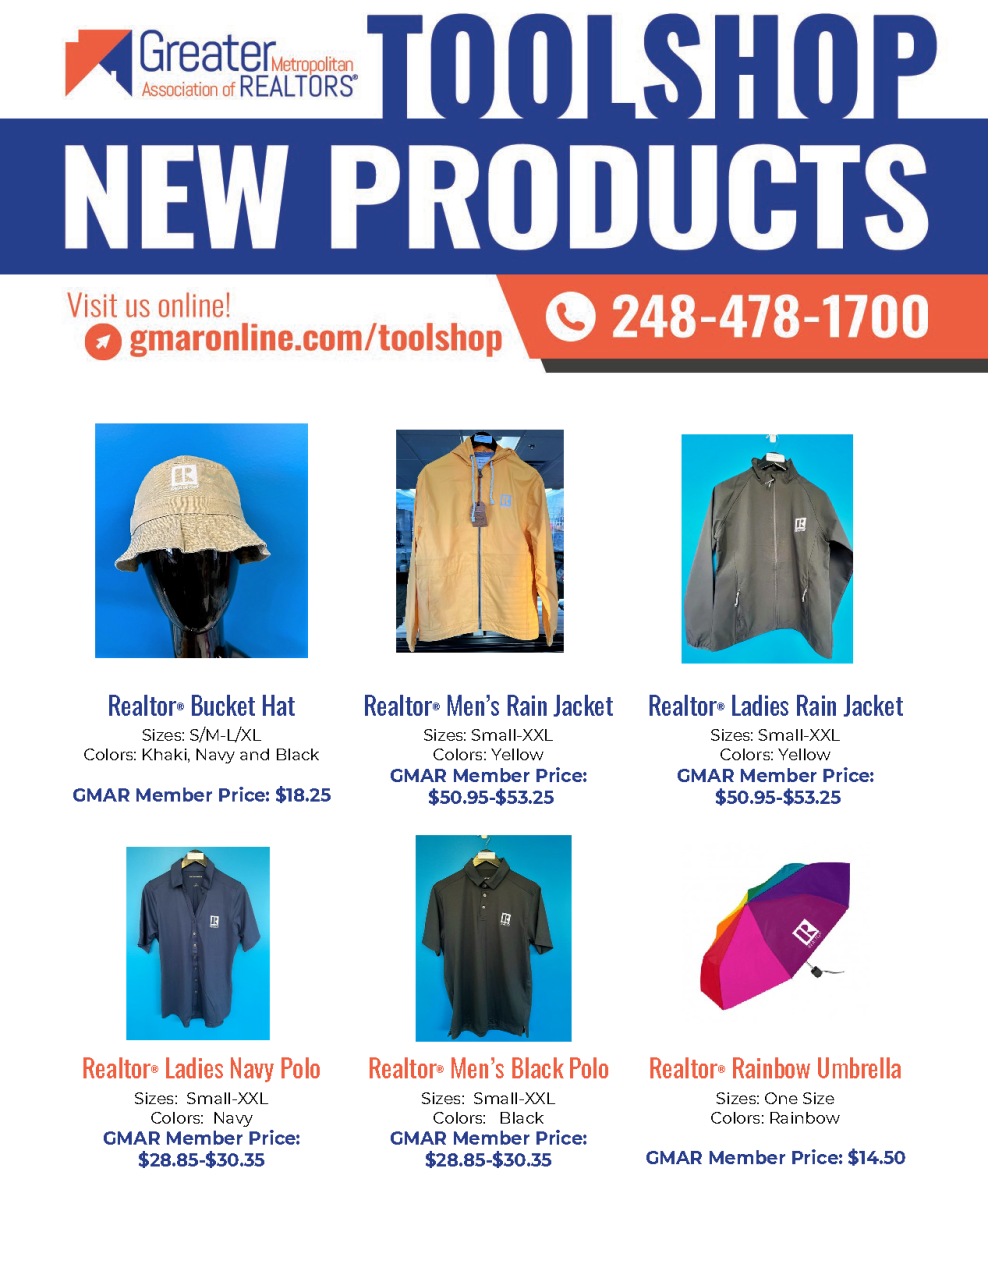 Toolshop New Products